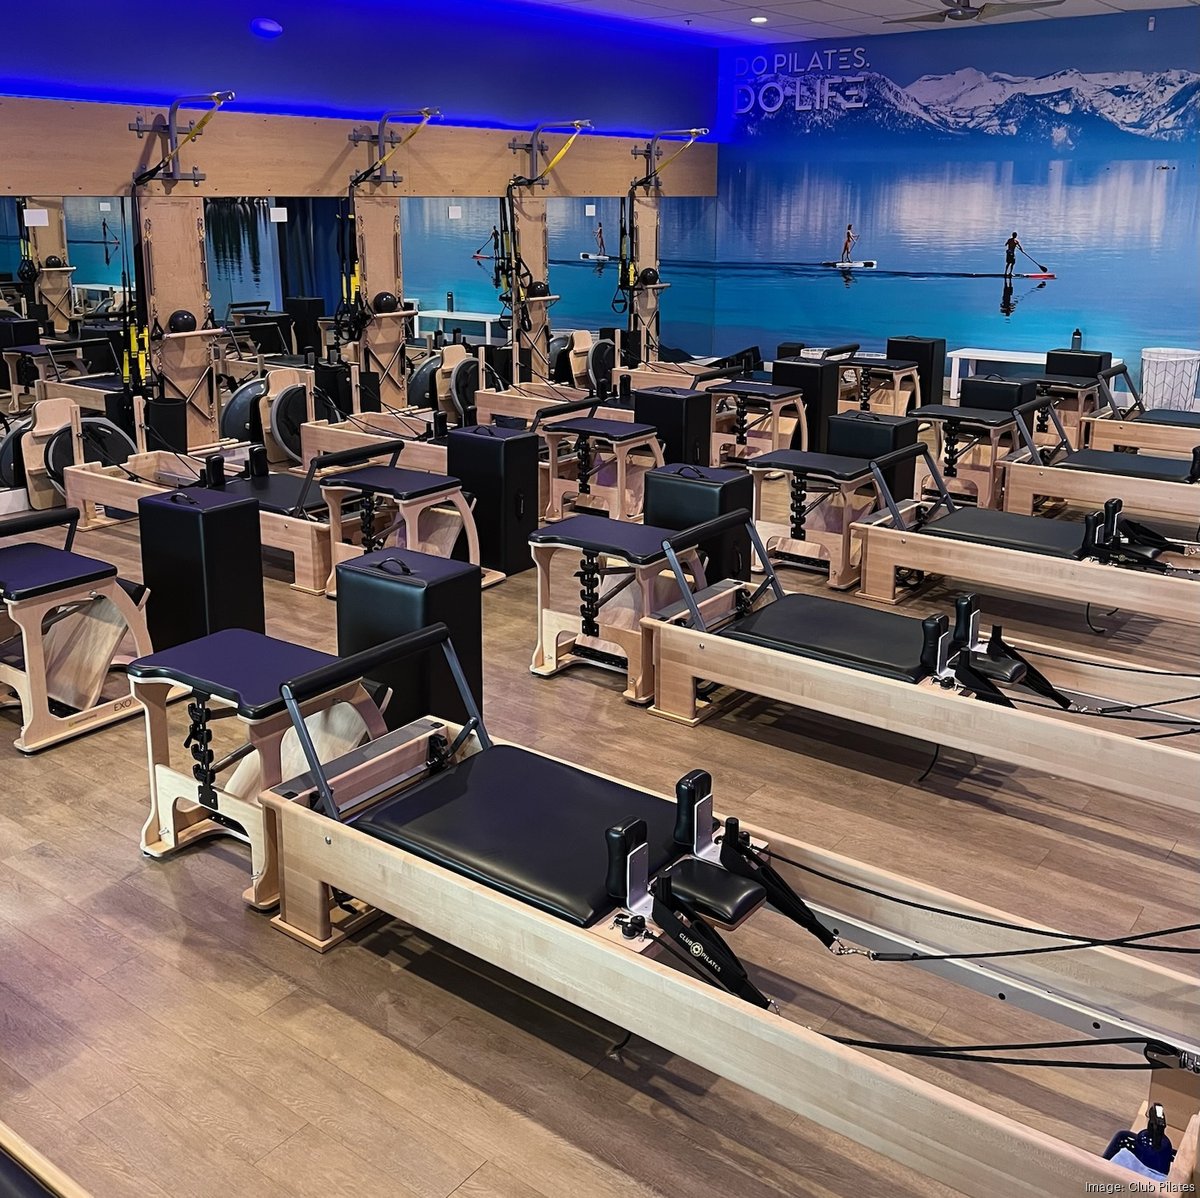 Business Spotlight: Club Pilates and CycleBar - Middletown - Towne Post  Network - Local Business Directory